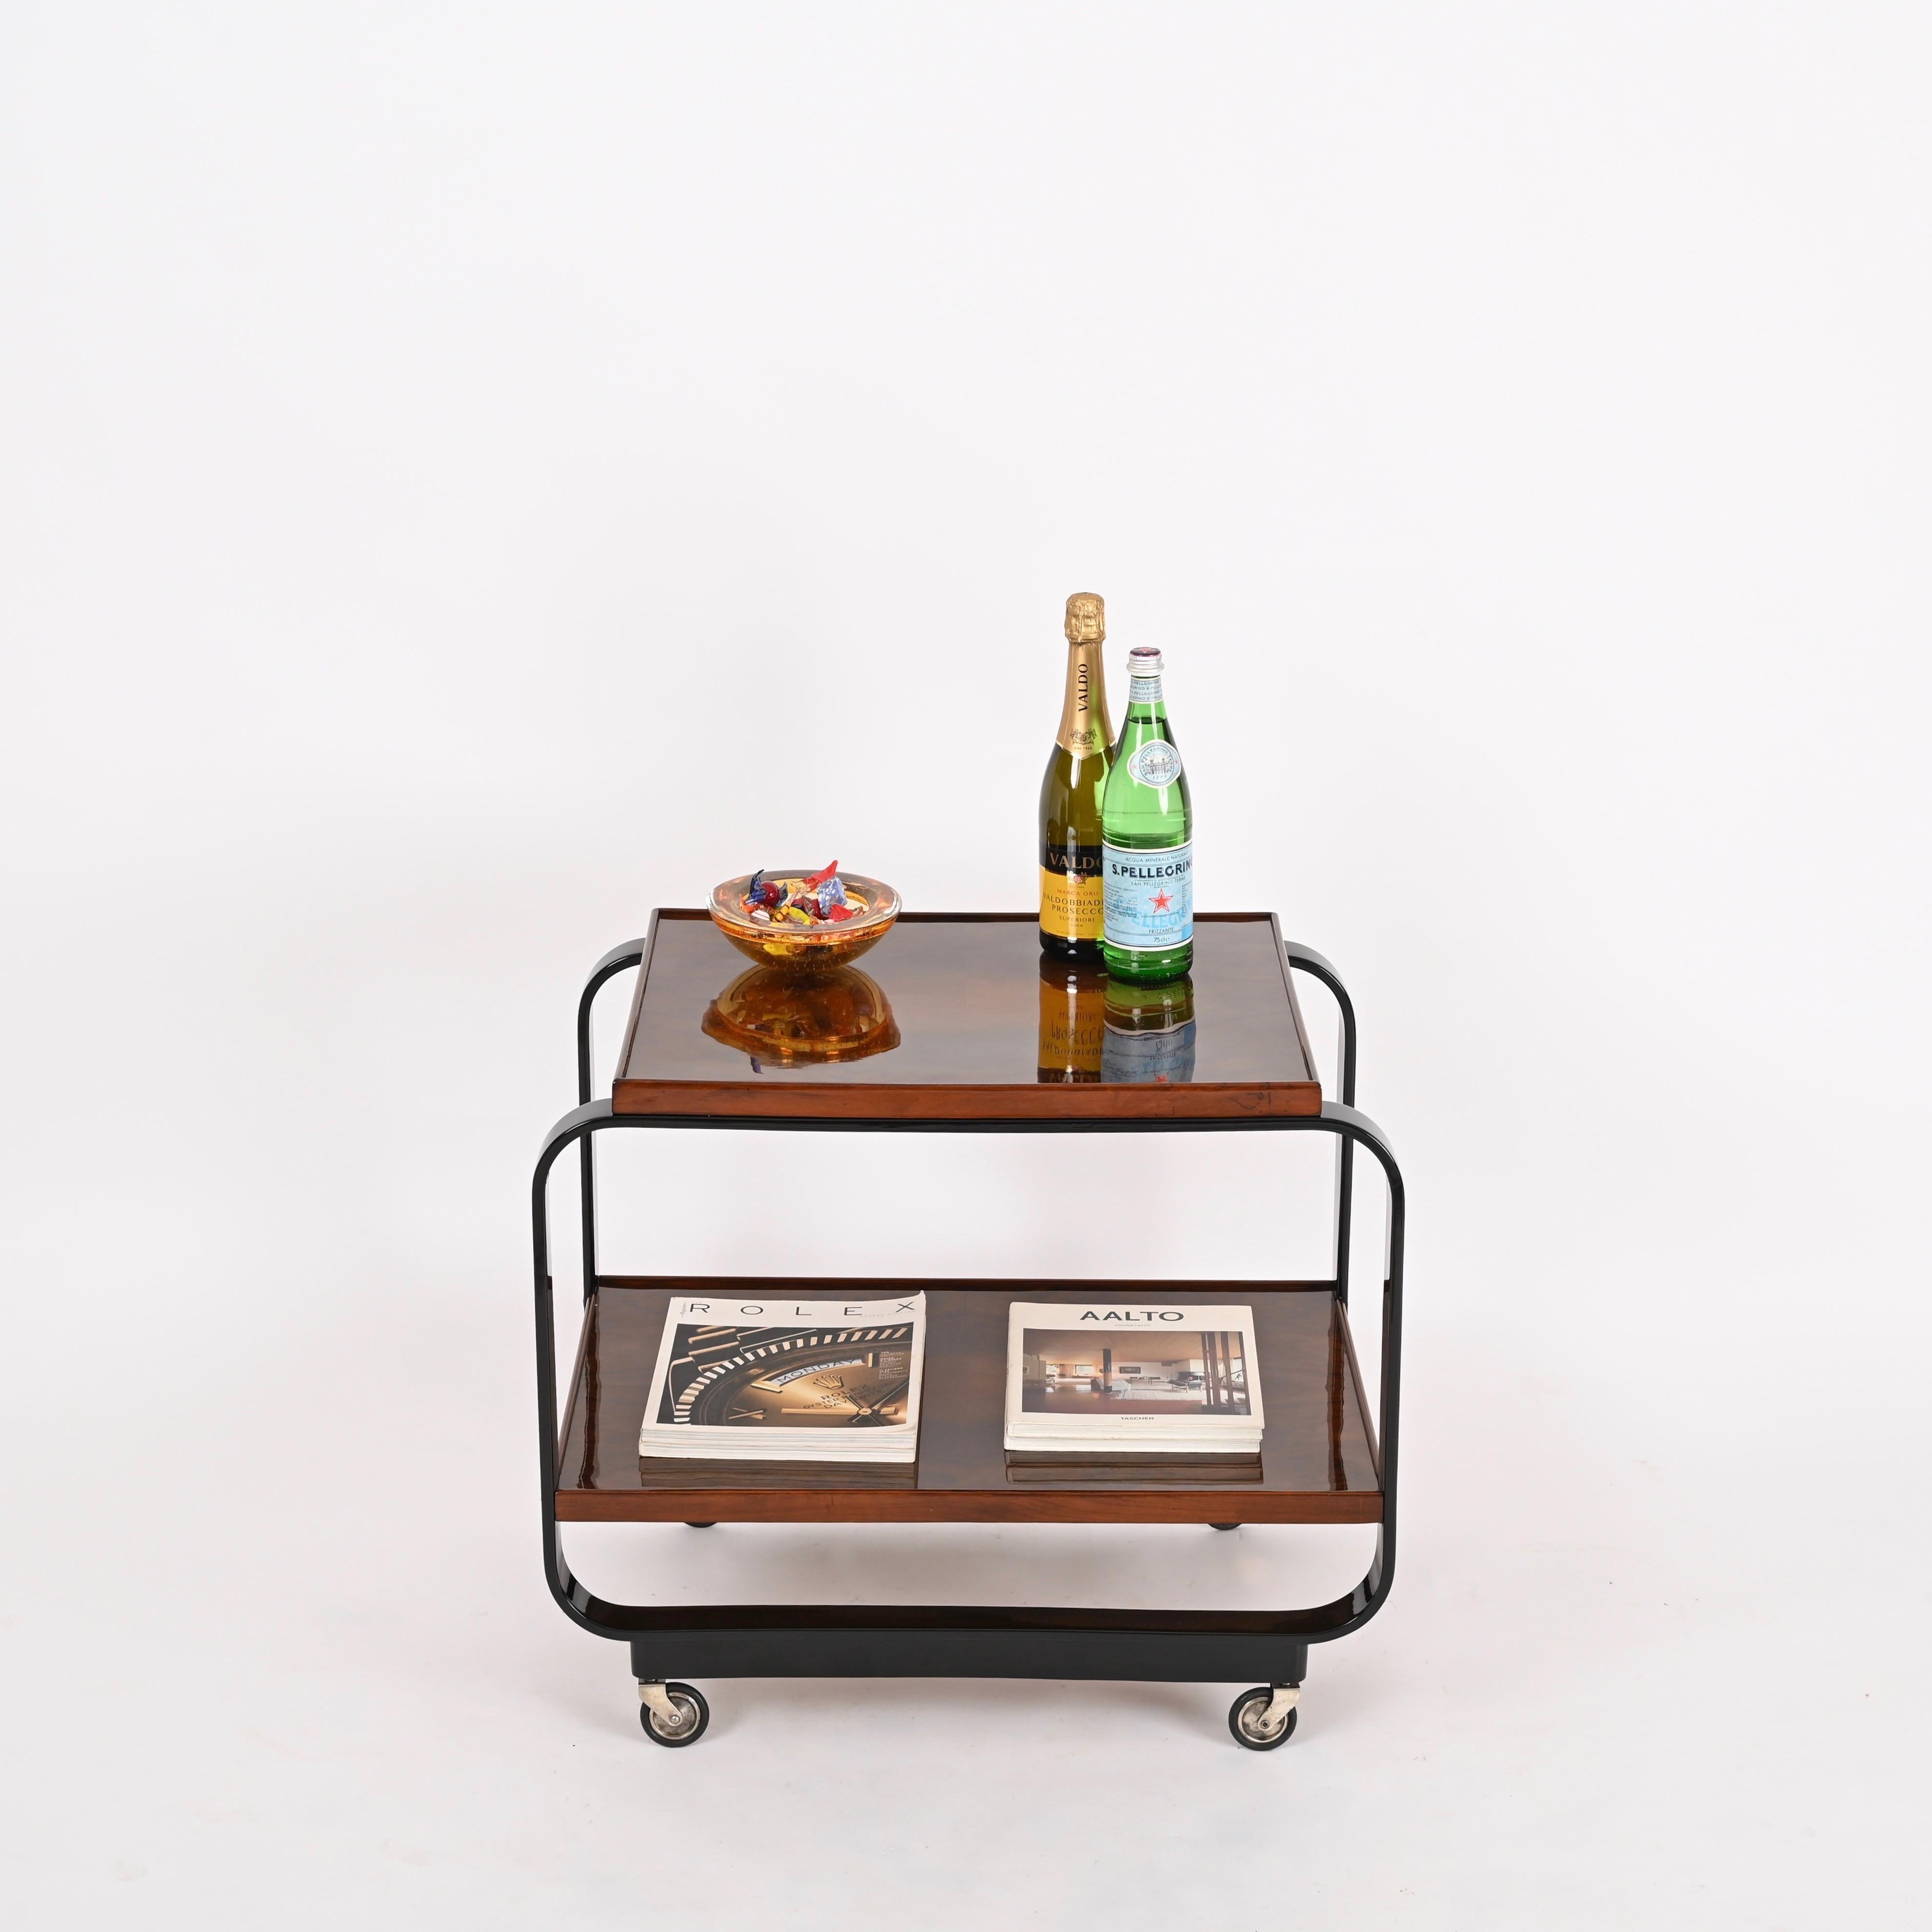 Chrome Serving Bar Cart by Gino Maggioni Signed, Bent Curly Walnut Wood, Italy, 1930s For Sale